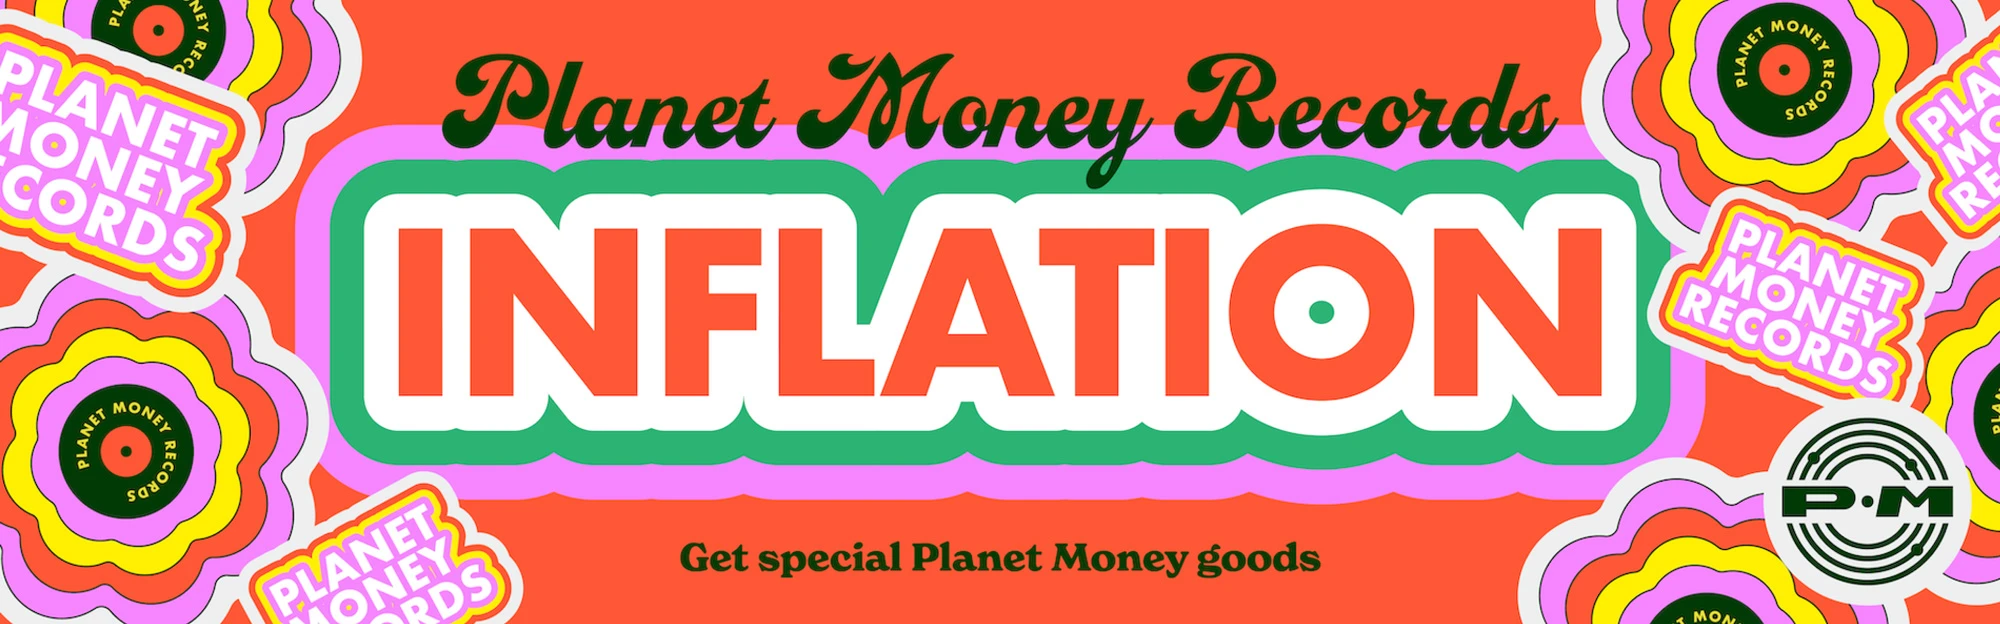 Planet Money Records Inflation